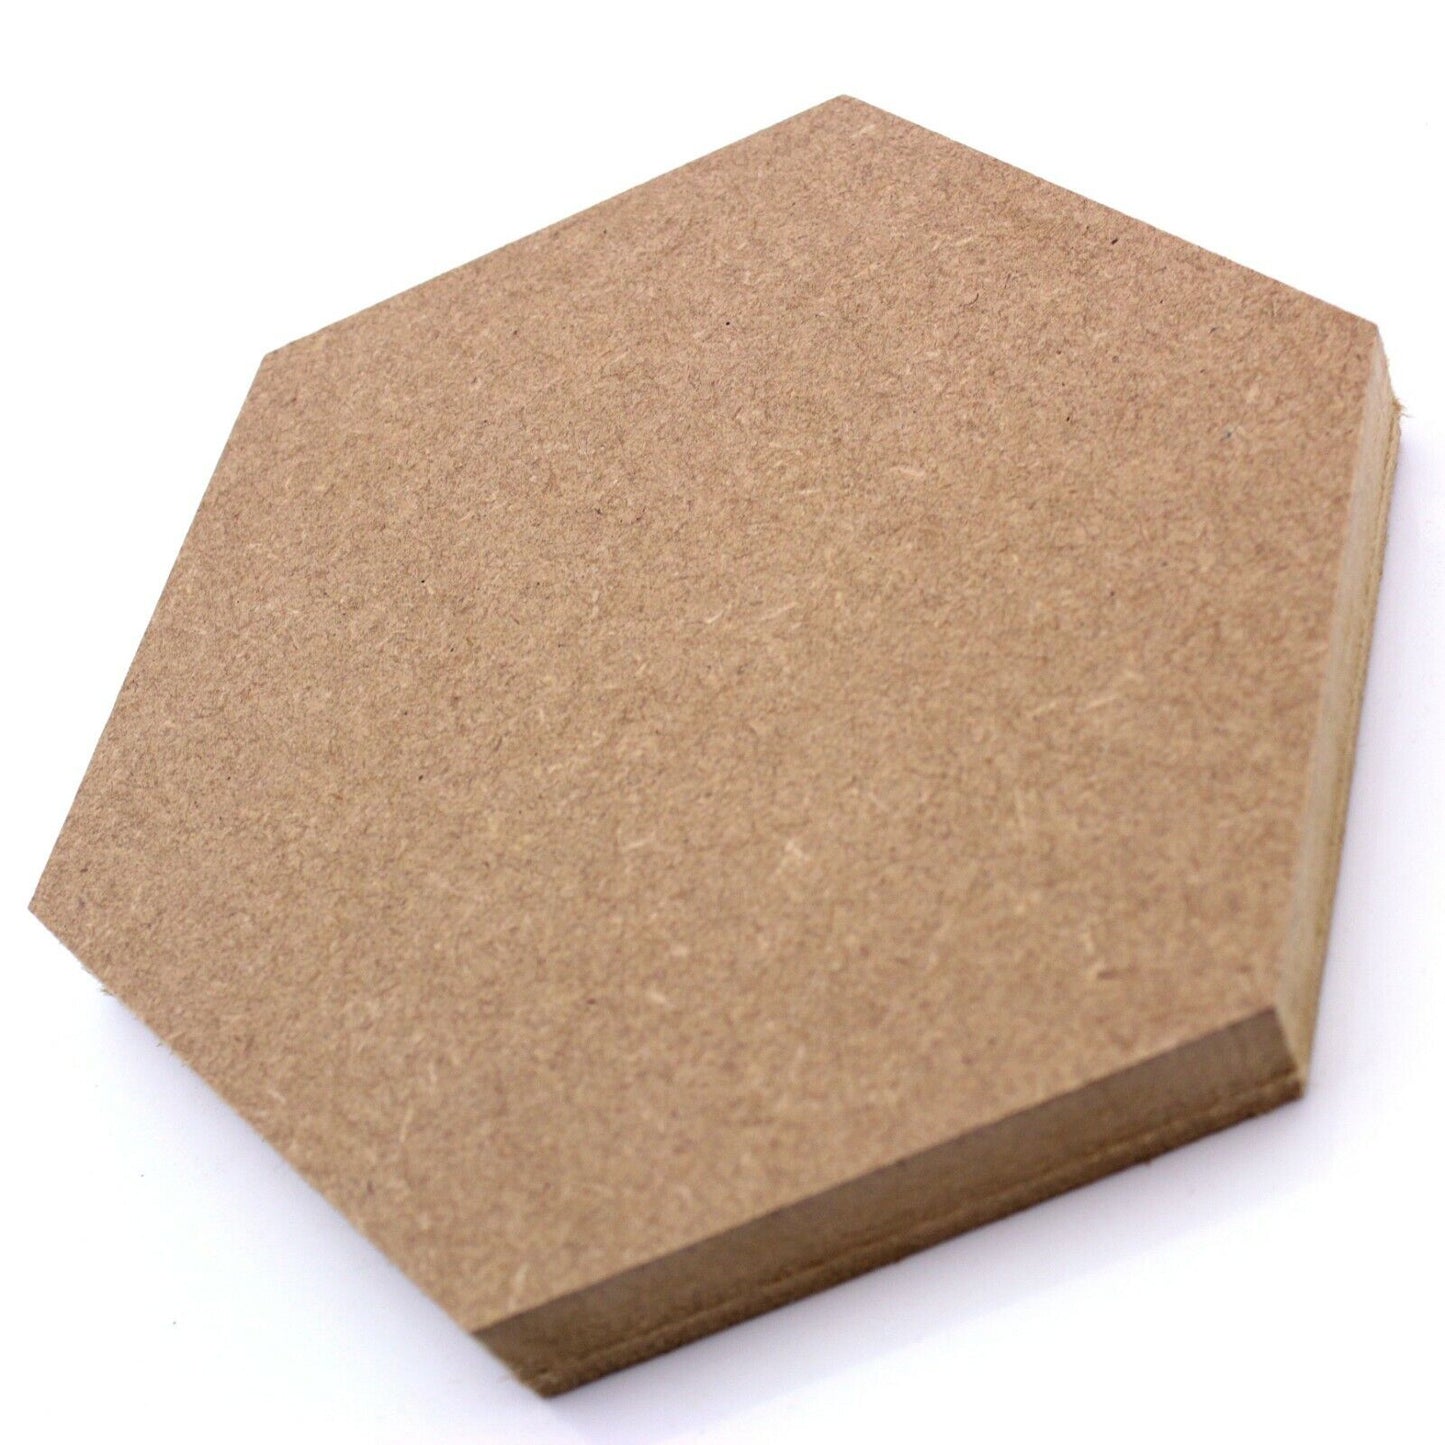 Free Standing 18mm MDF Hexagon Craft Shape. 10cm to 30cm Sizes. Bee, Blank, Base